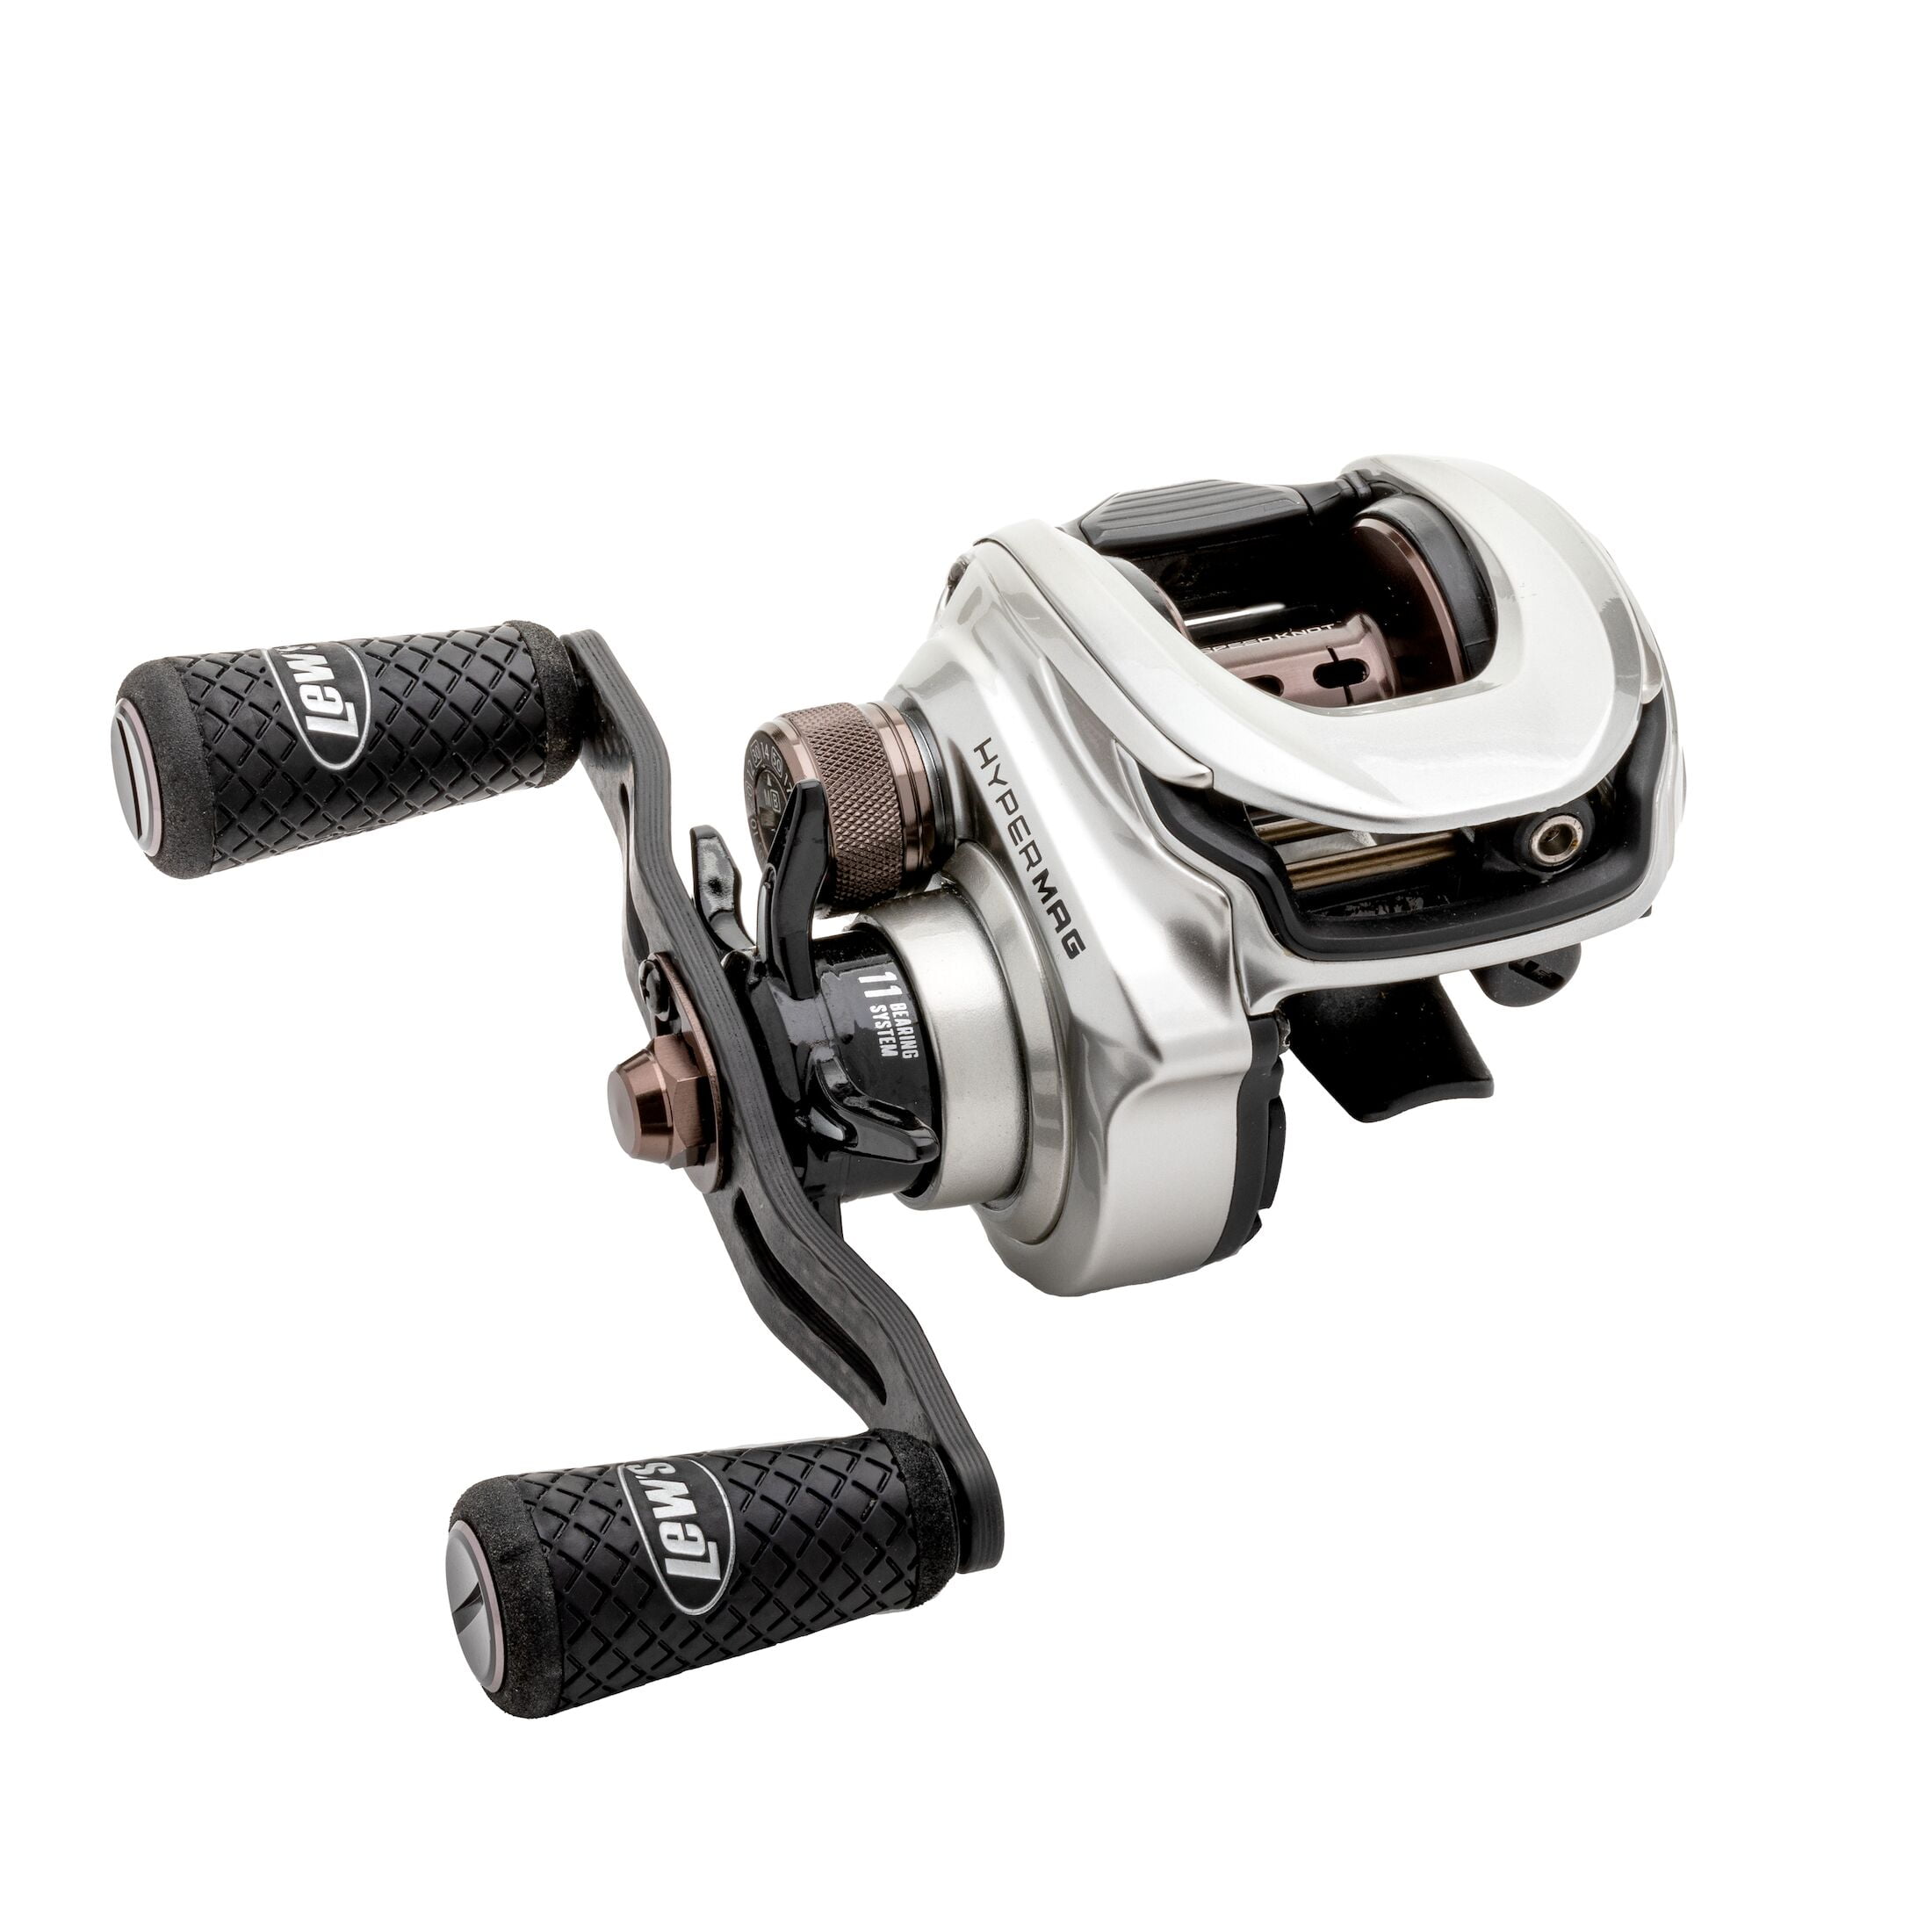 Cadence CB568 Baitcasting Reels Lightweight Graphite Frame Fishing Reels  with Corrosion Resistant Bearings Baitcaster Reels Carbon Fiber Drag  Baitcast Reels with 7.3:1 Gear Ratio Casting Cb5r Red Right 6.6:1